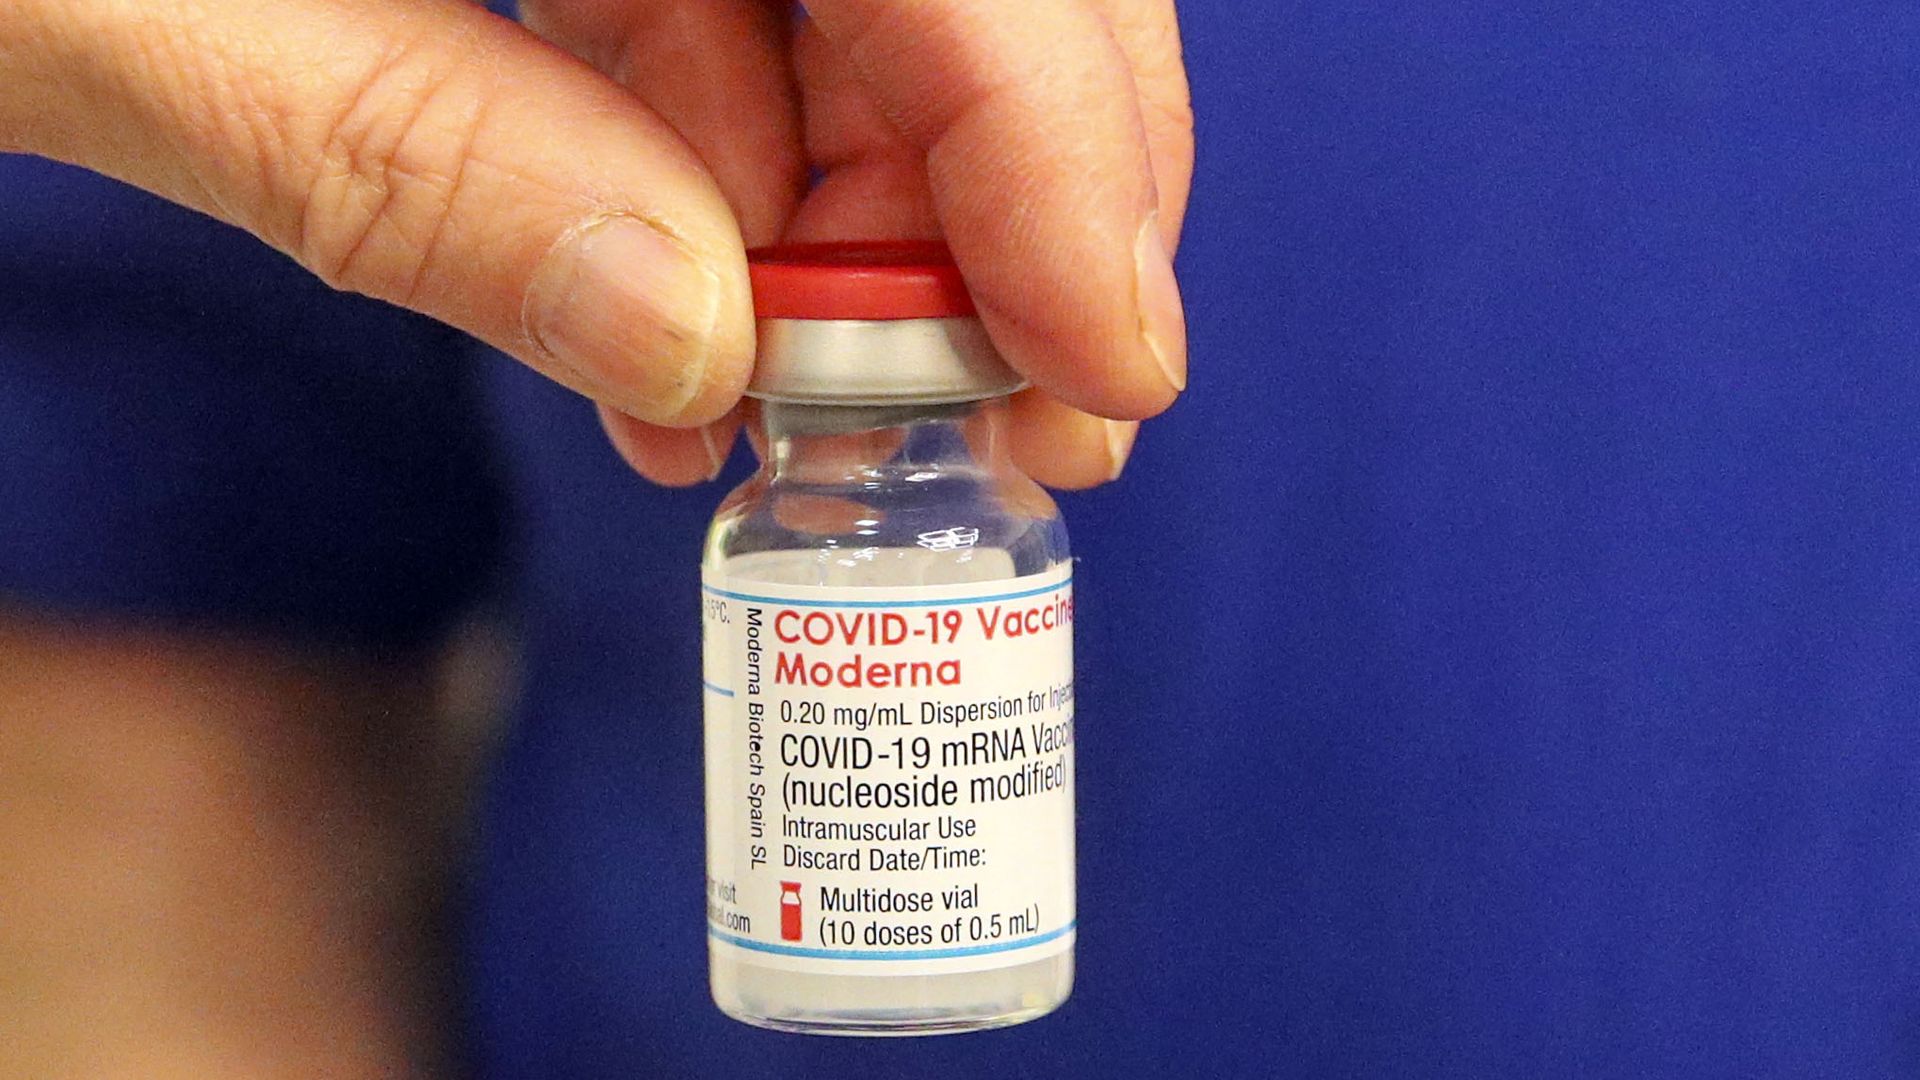 A vial of Moderna vaccine is held by a hand